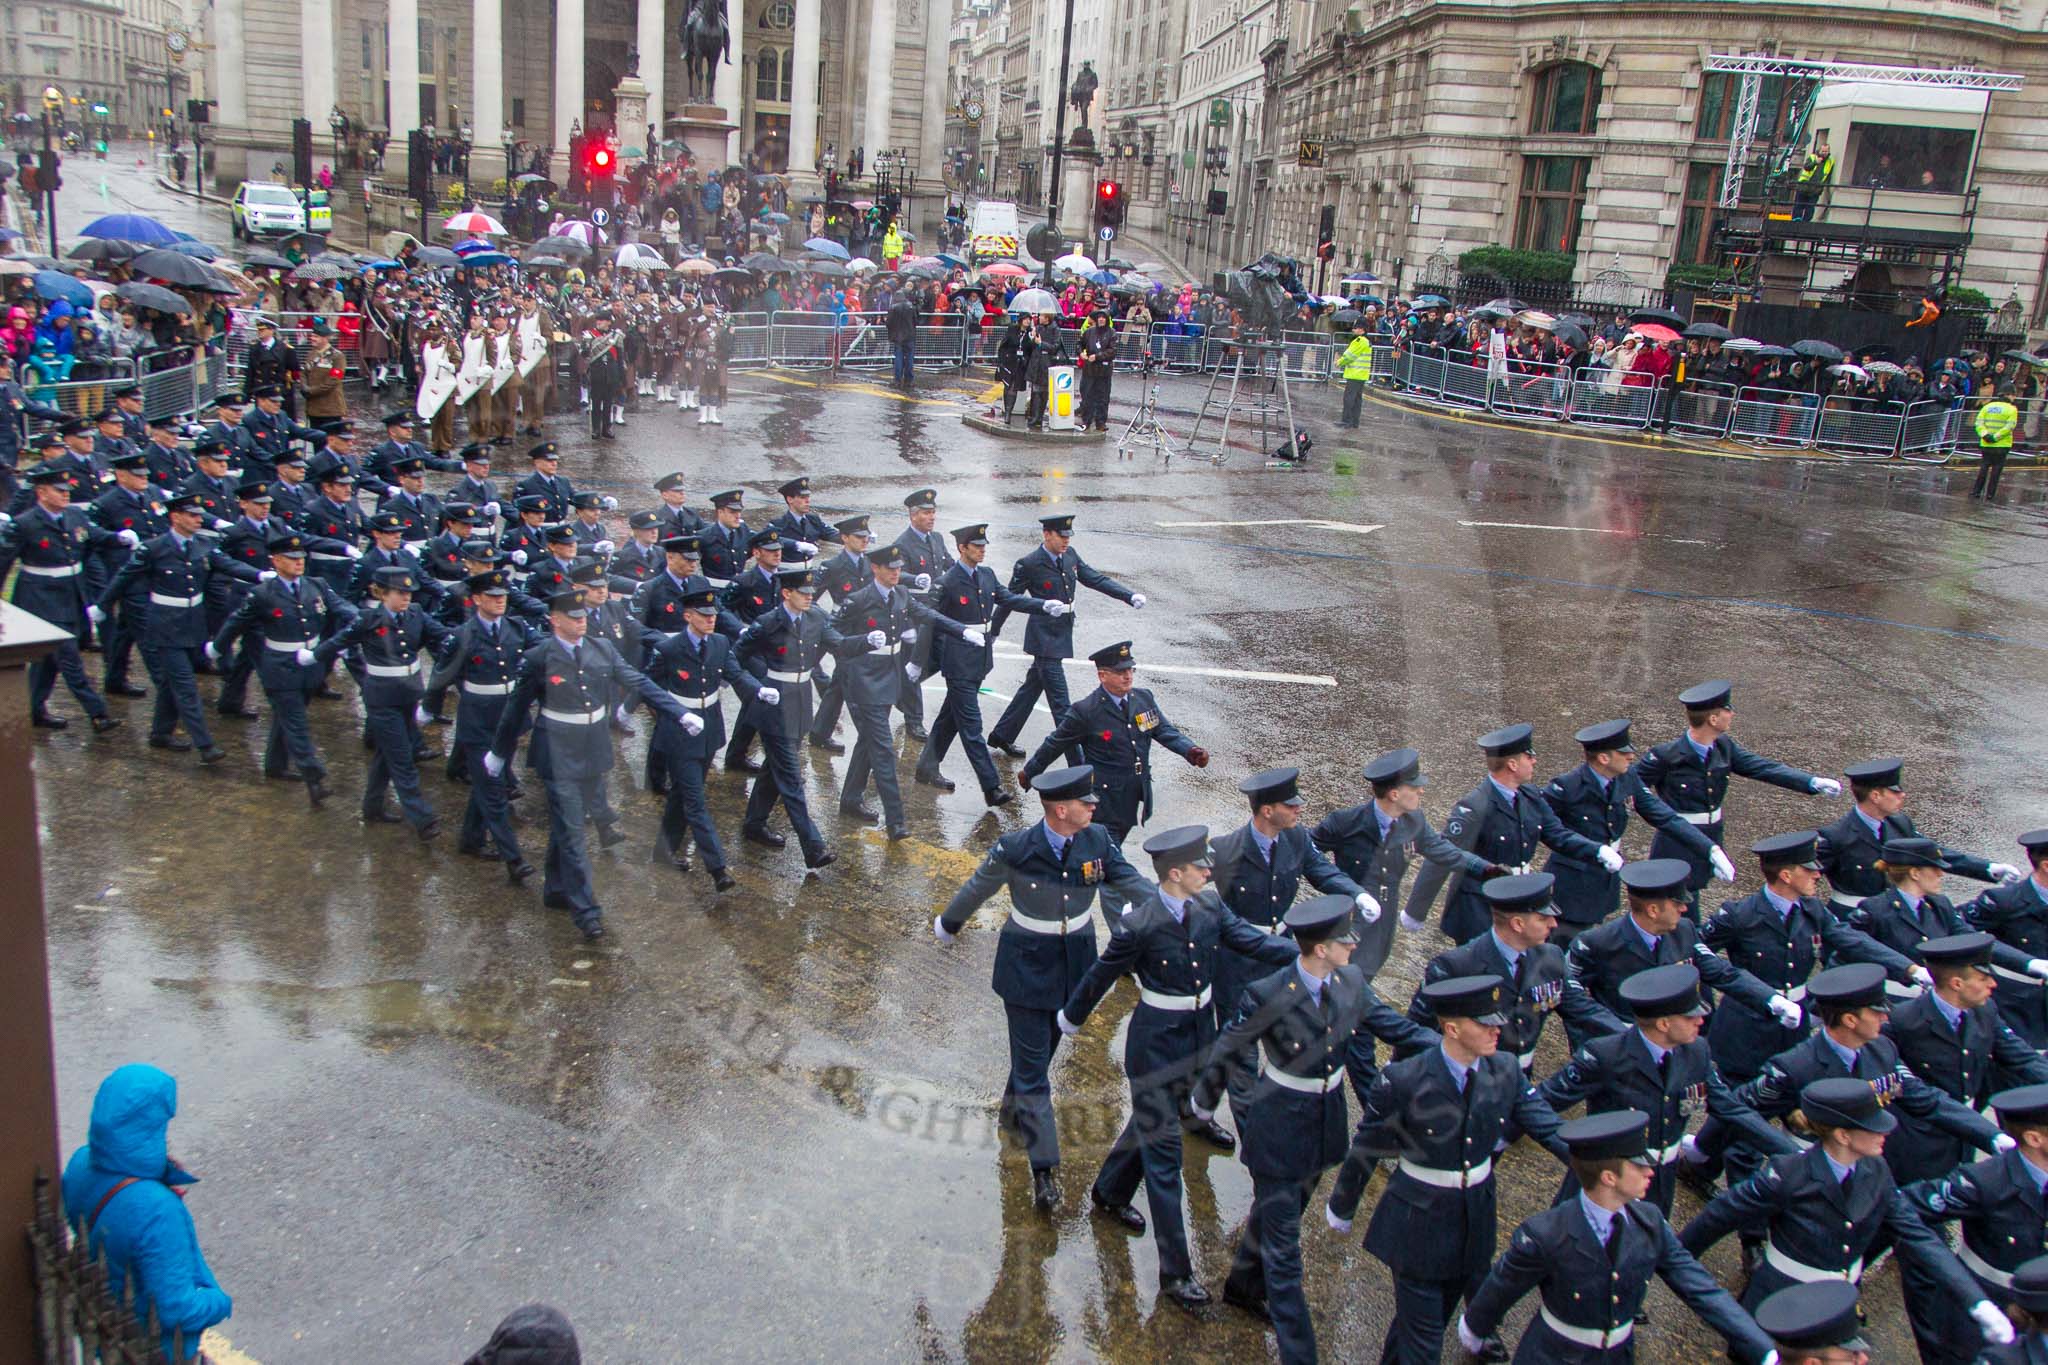 Lord Mayor's Show 2013: 16-Royal Air Force- marching contingent includes Regular and Reserve personnel..
Press stand opposite Mansion House, City of London,
London,
Greater London,
United Kingdom,
on 09 November 2013 at 11:08, image #296